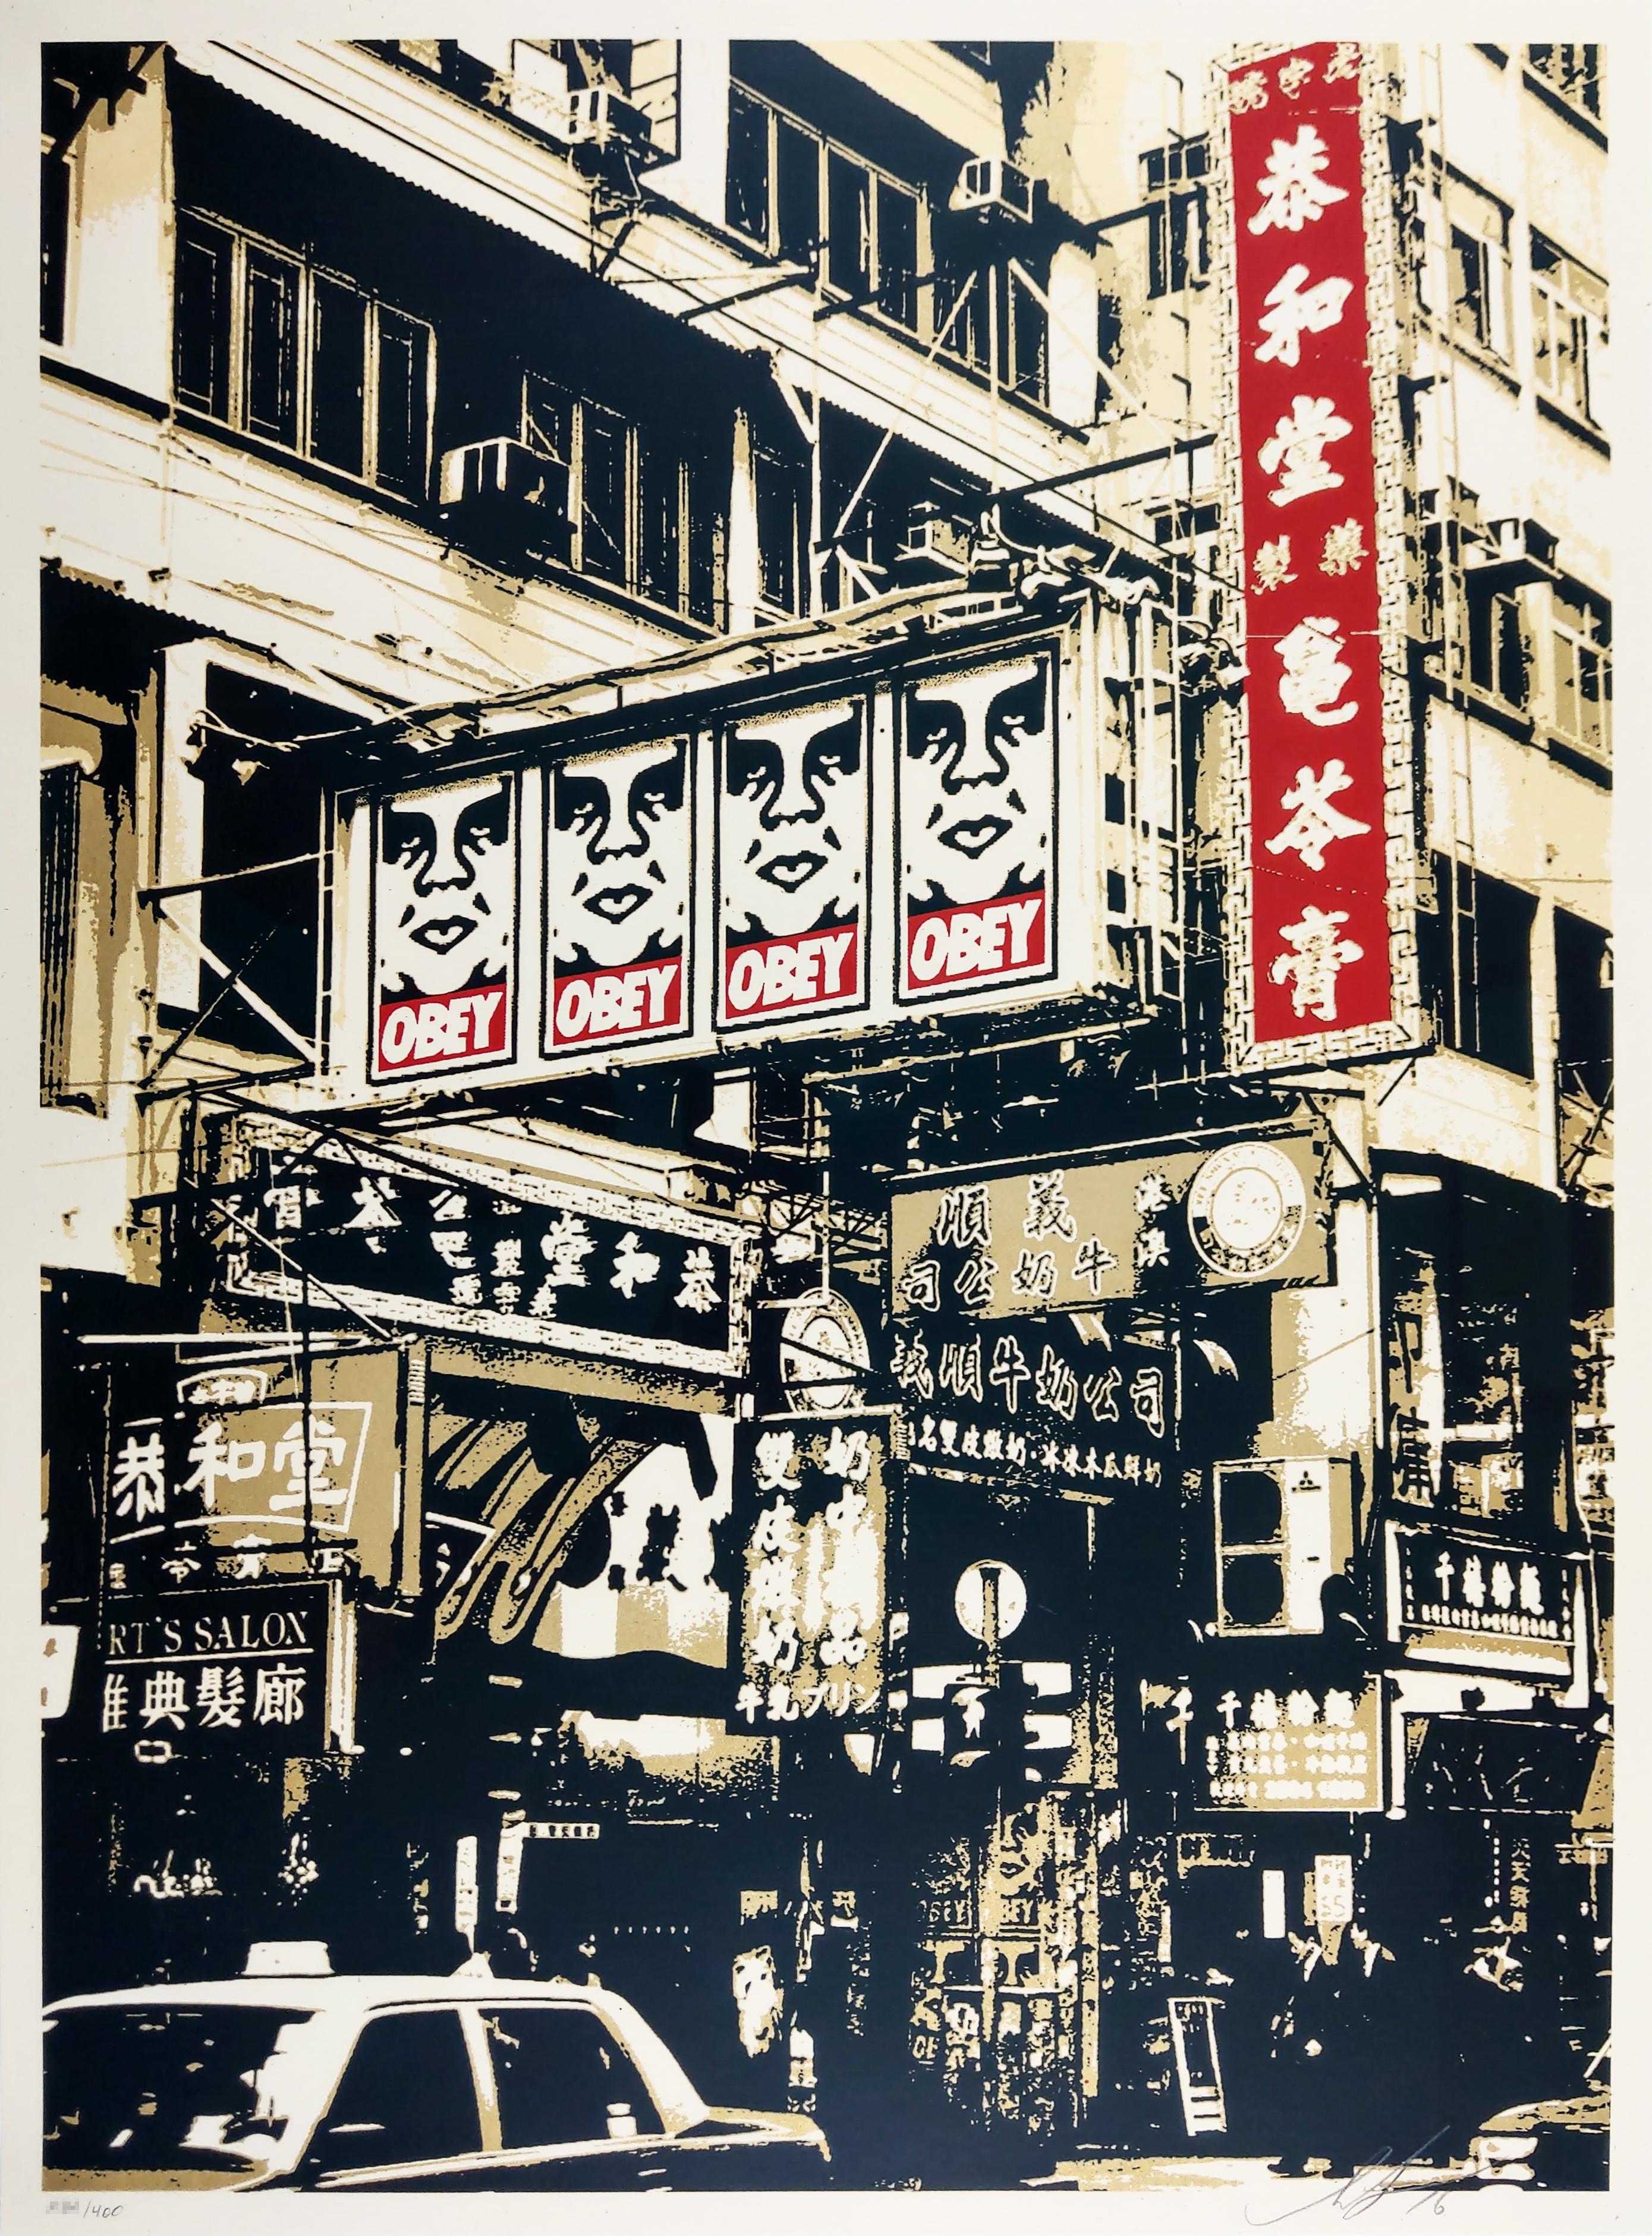 Visual Disobedience. 18 inches x 24 inches Screen Print on cream Speckle Tone paper. Signed by Shepard Fairey. Numbered edition of 400.  Hong Kong, China museum show. 

"For my Hong Kong “Visual Disobedience” museum show, I created a painting and